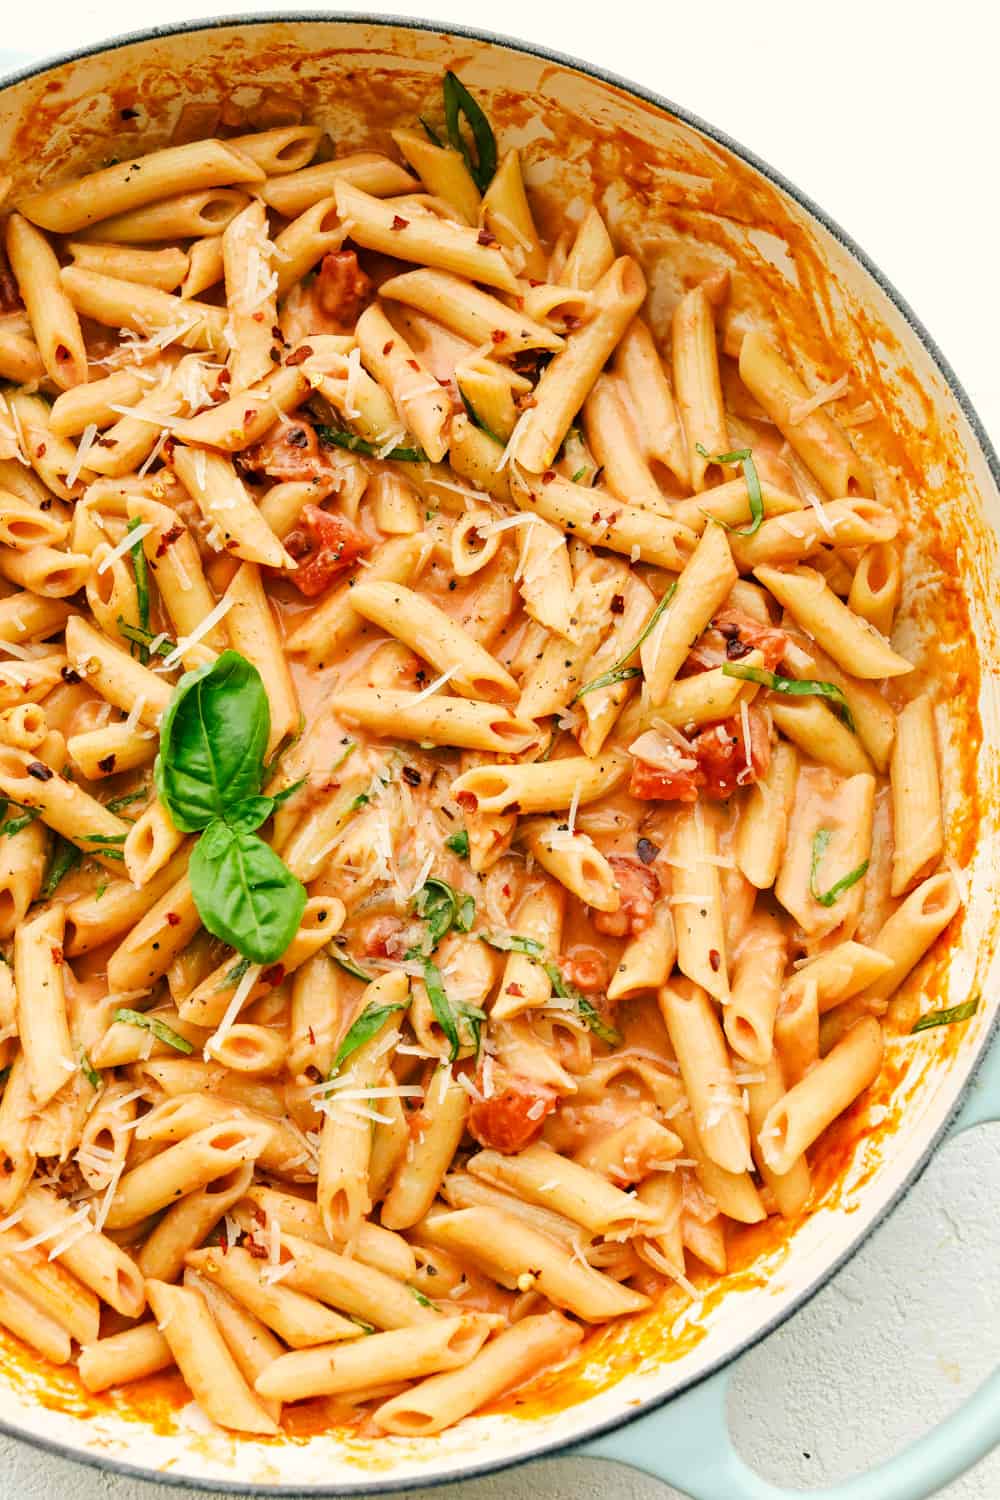 How to Make the Best Penne alla Vodka Recipe